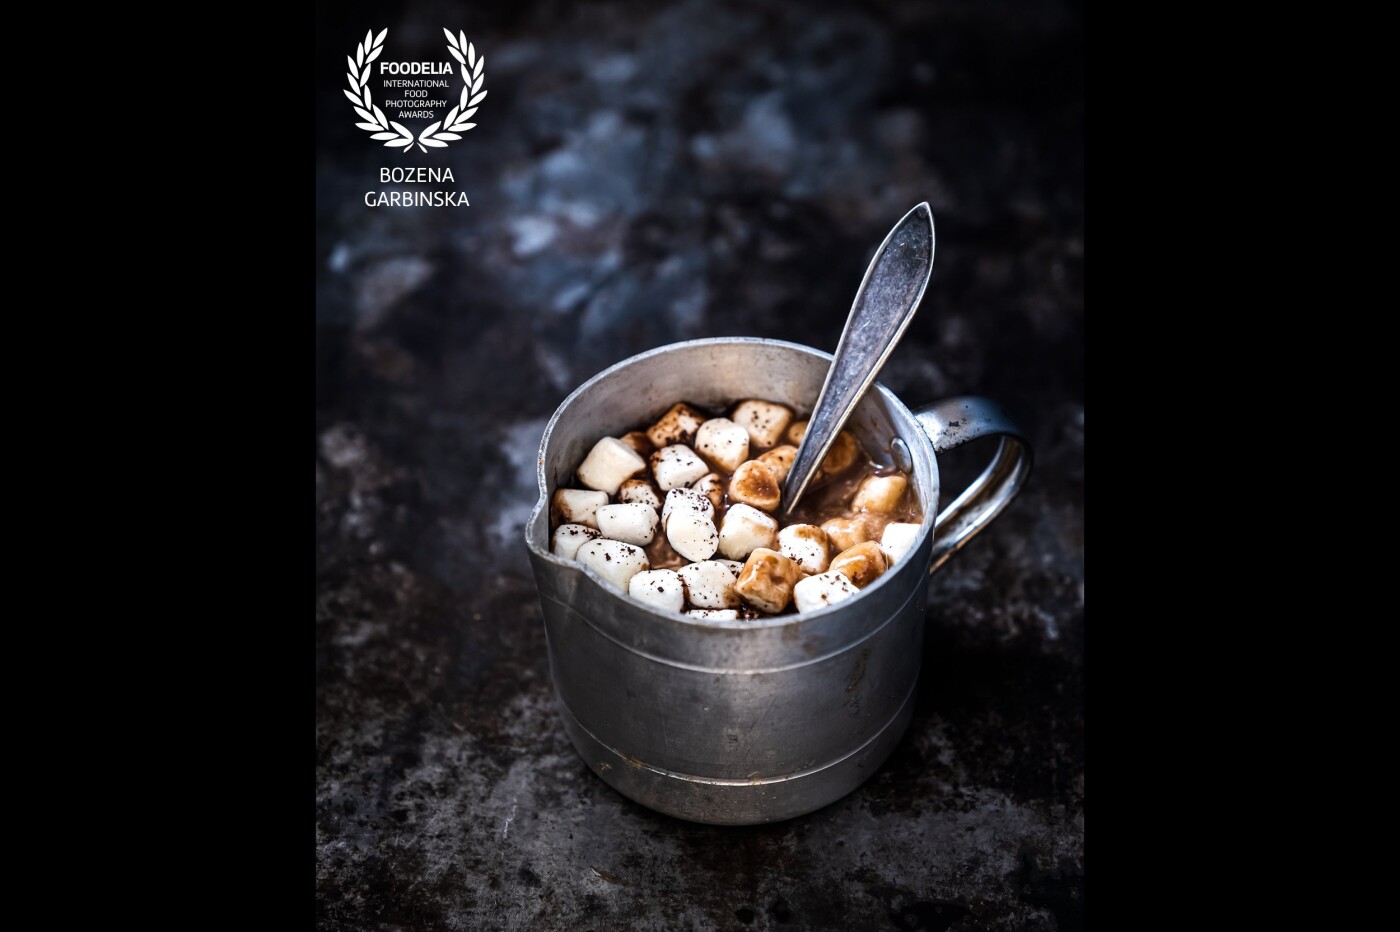 Self-made hot chocolate with marshmallows it's the best for winter evenings<br />
Camera: Fuji X-T3<br />
Lens: Fujinon 16-55 F3.2<br />
Natural light.